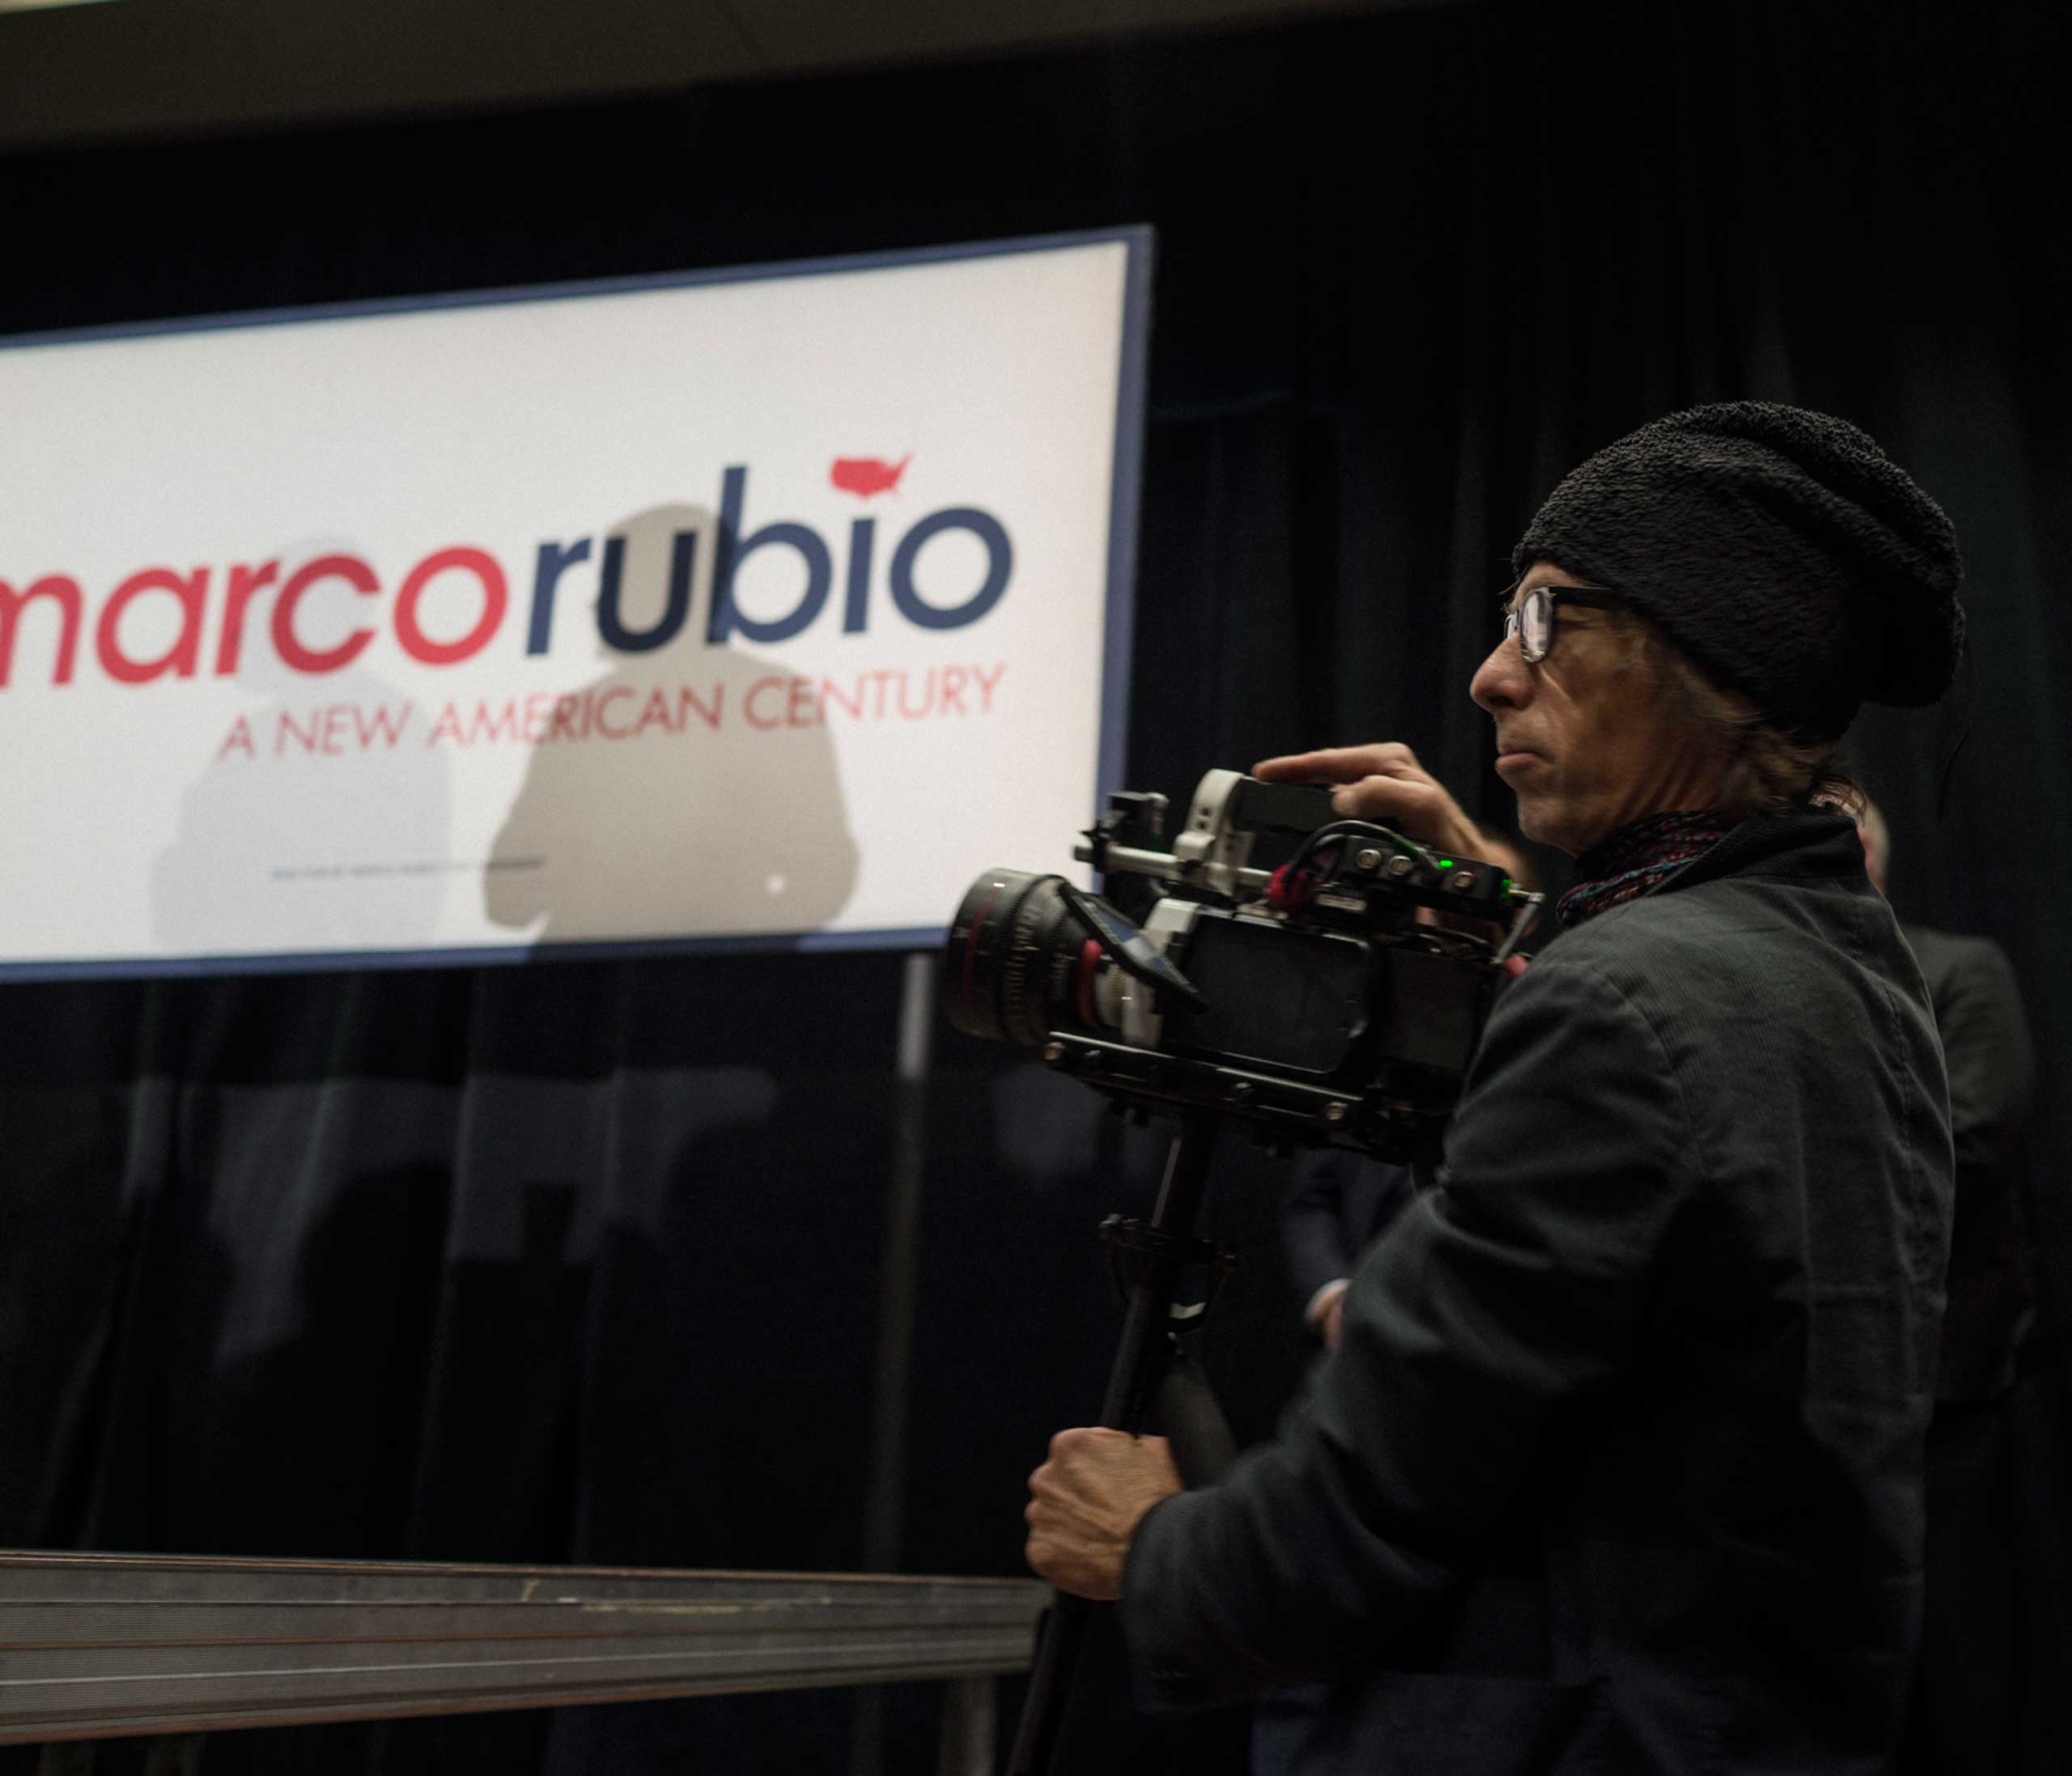 Photographer Christopher Morris with the Phantom high-speed camera at a Marco Rubio event at St. Ambrose University in Davenport, Iowa. (Jesse Narducci)